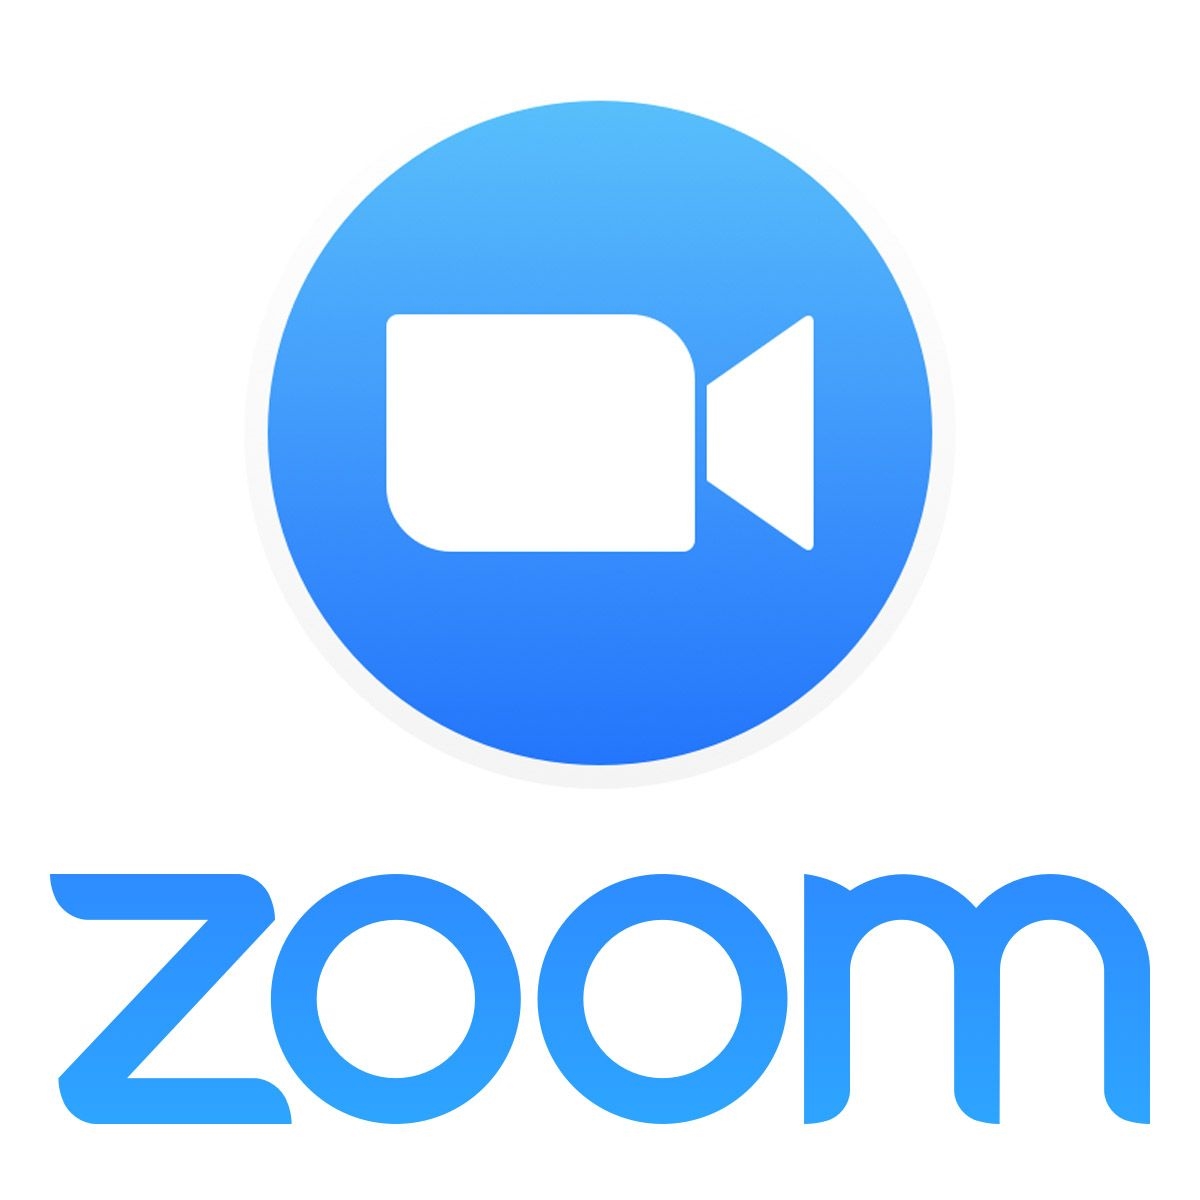 Update on Zoom Security